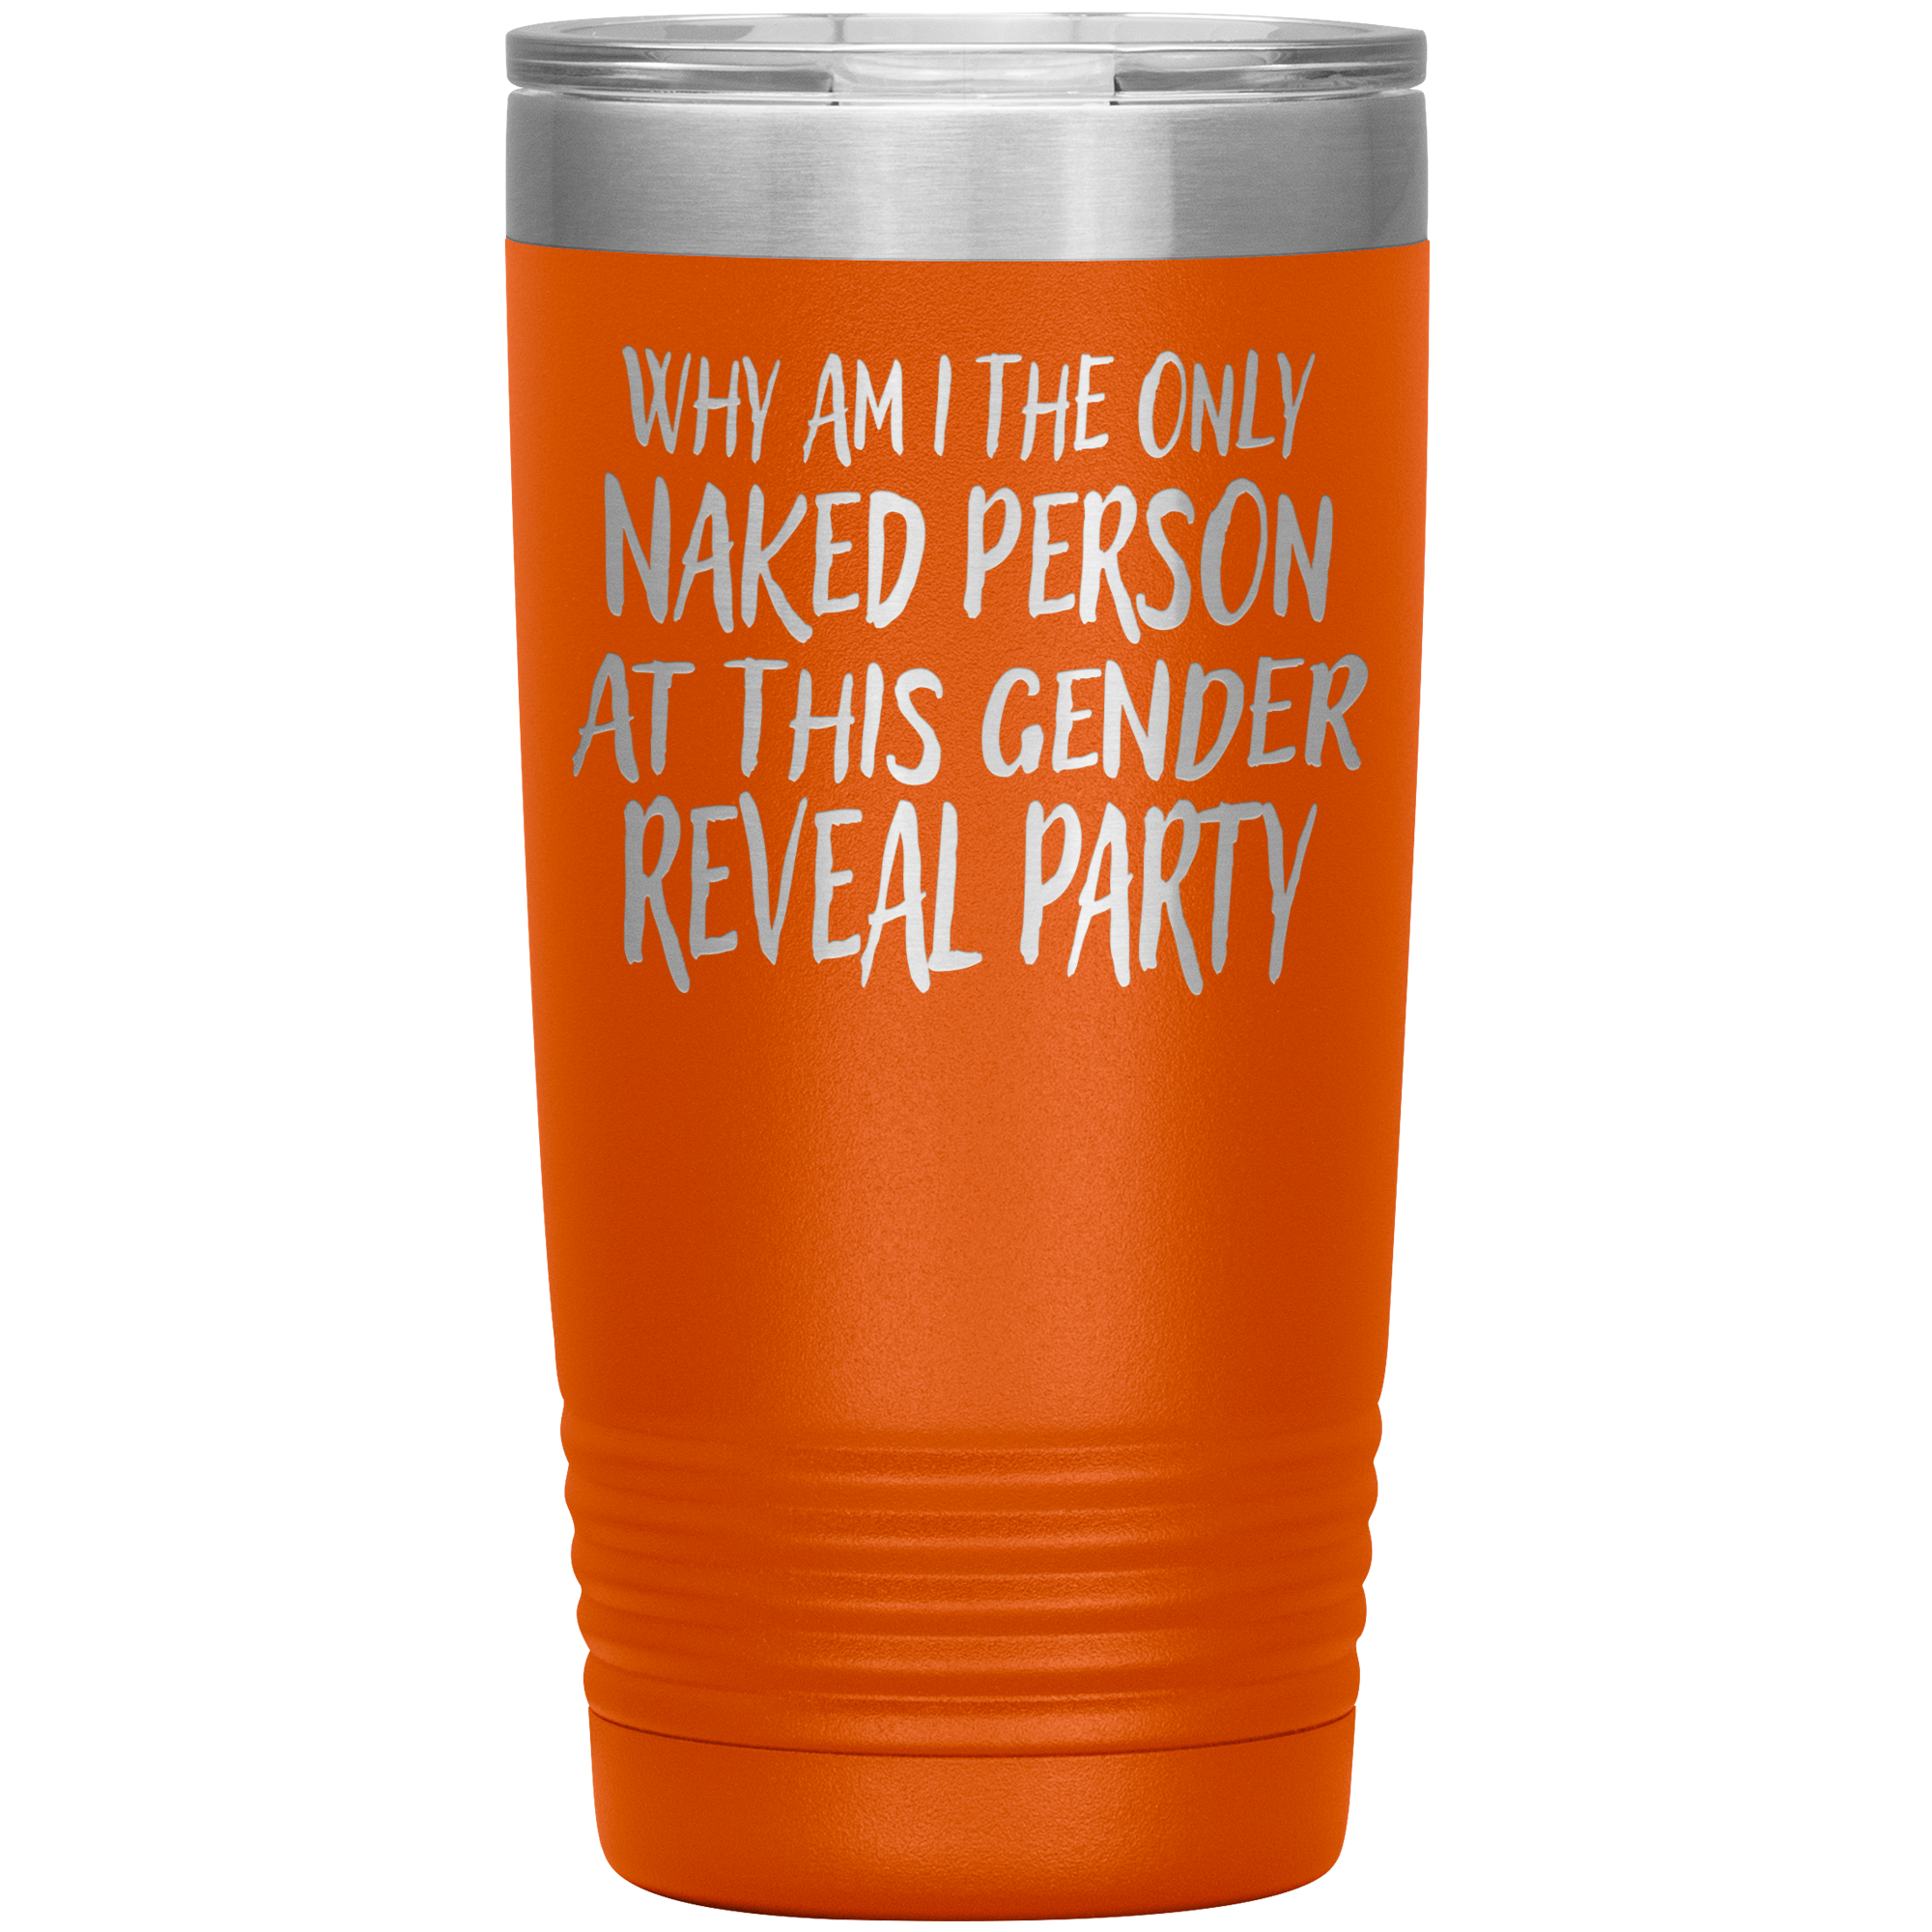 " NAKED IN GENDER REVEAL PARTY "